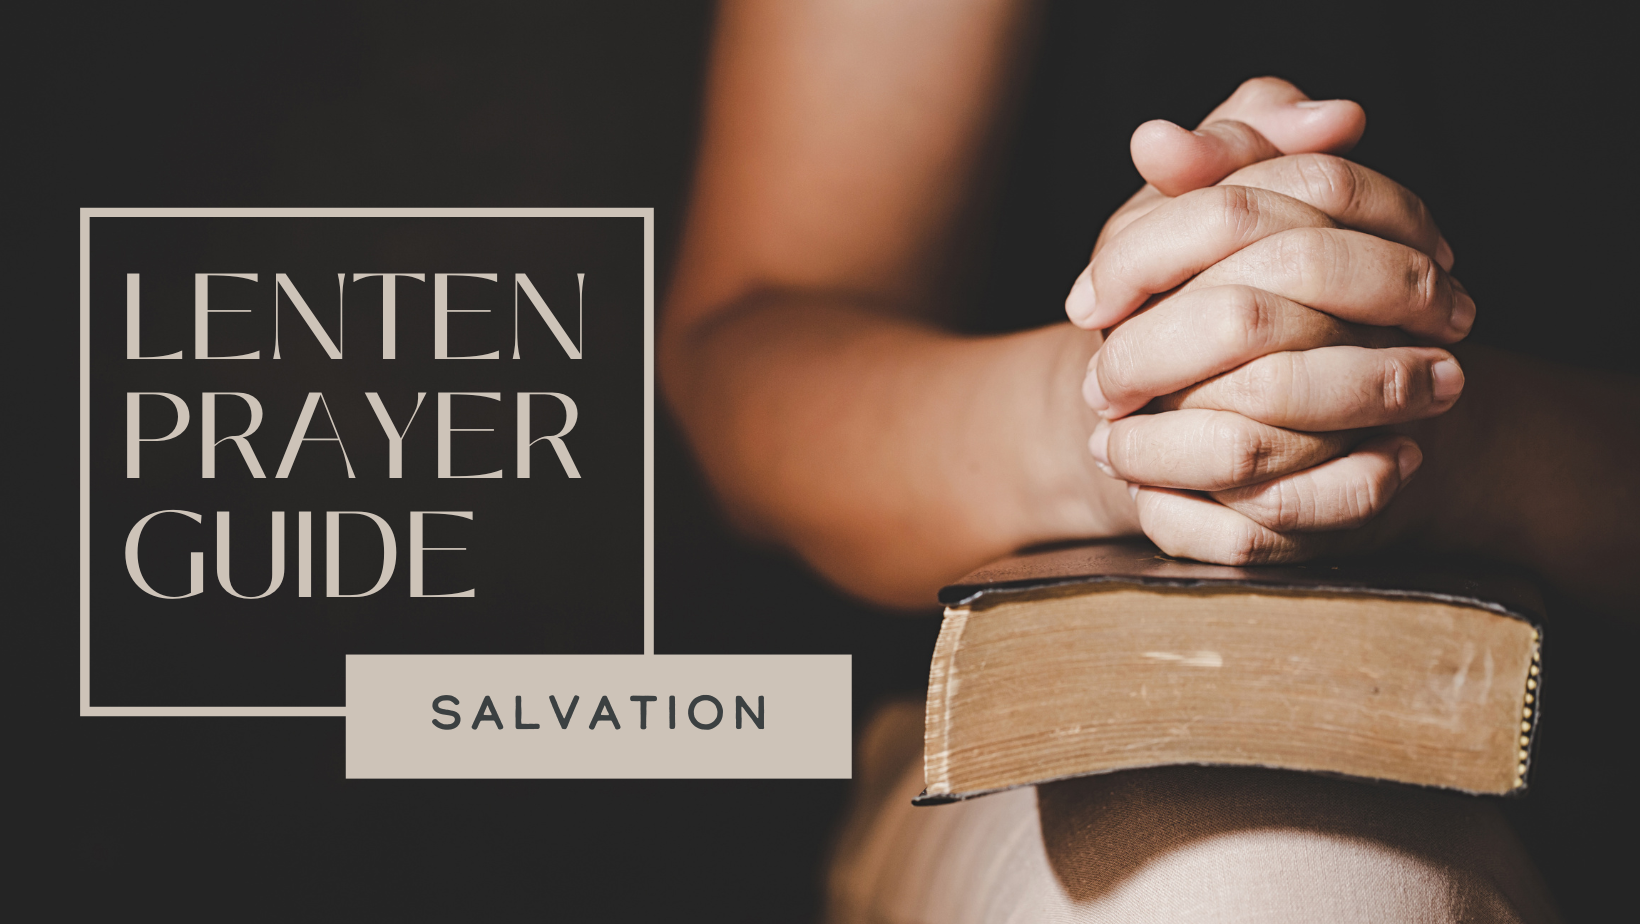 You are currently viewing Lenten Prayer Guide: Salvation